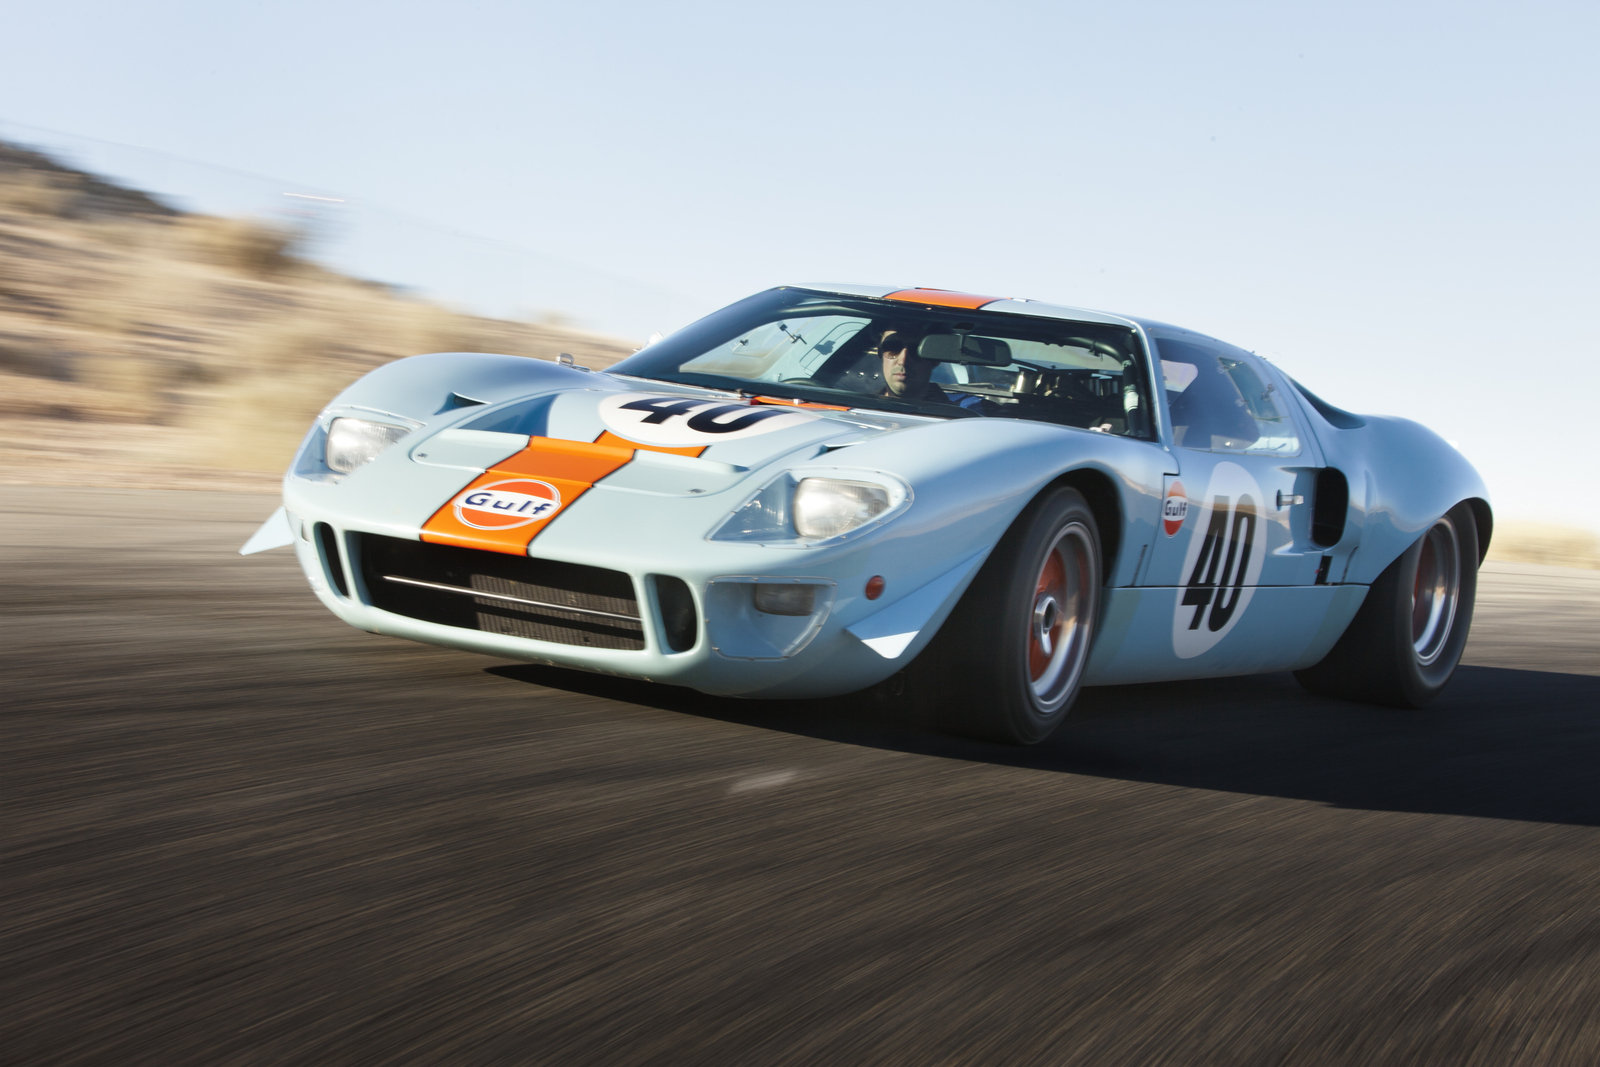 Ford Gt40 Wallpapers Vehicles Hq Ford Gt40 Pictures 4k Wallpapers 2019